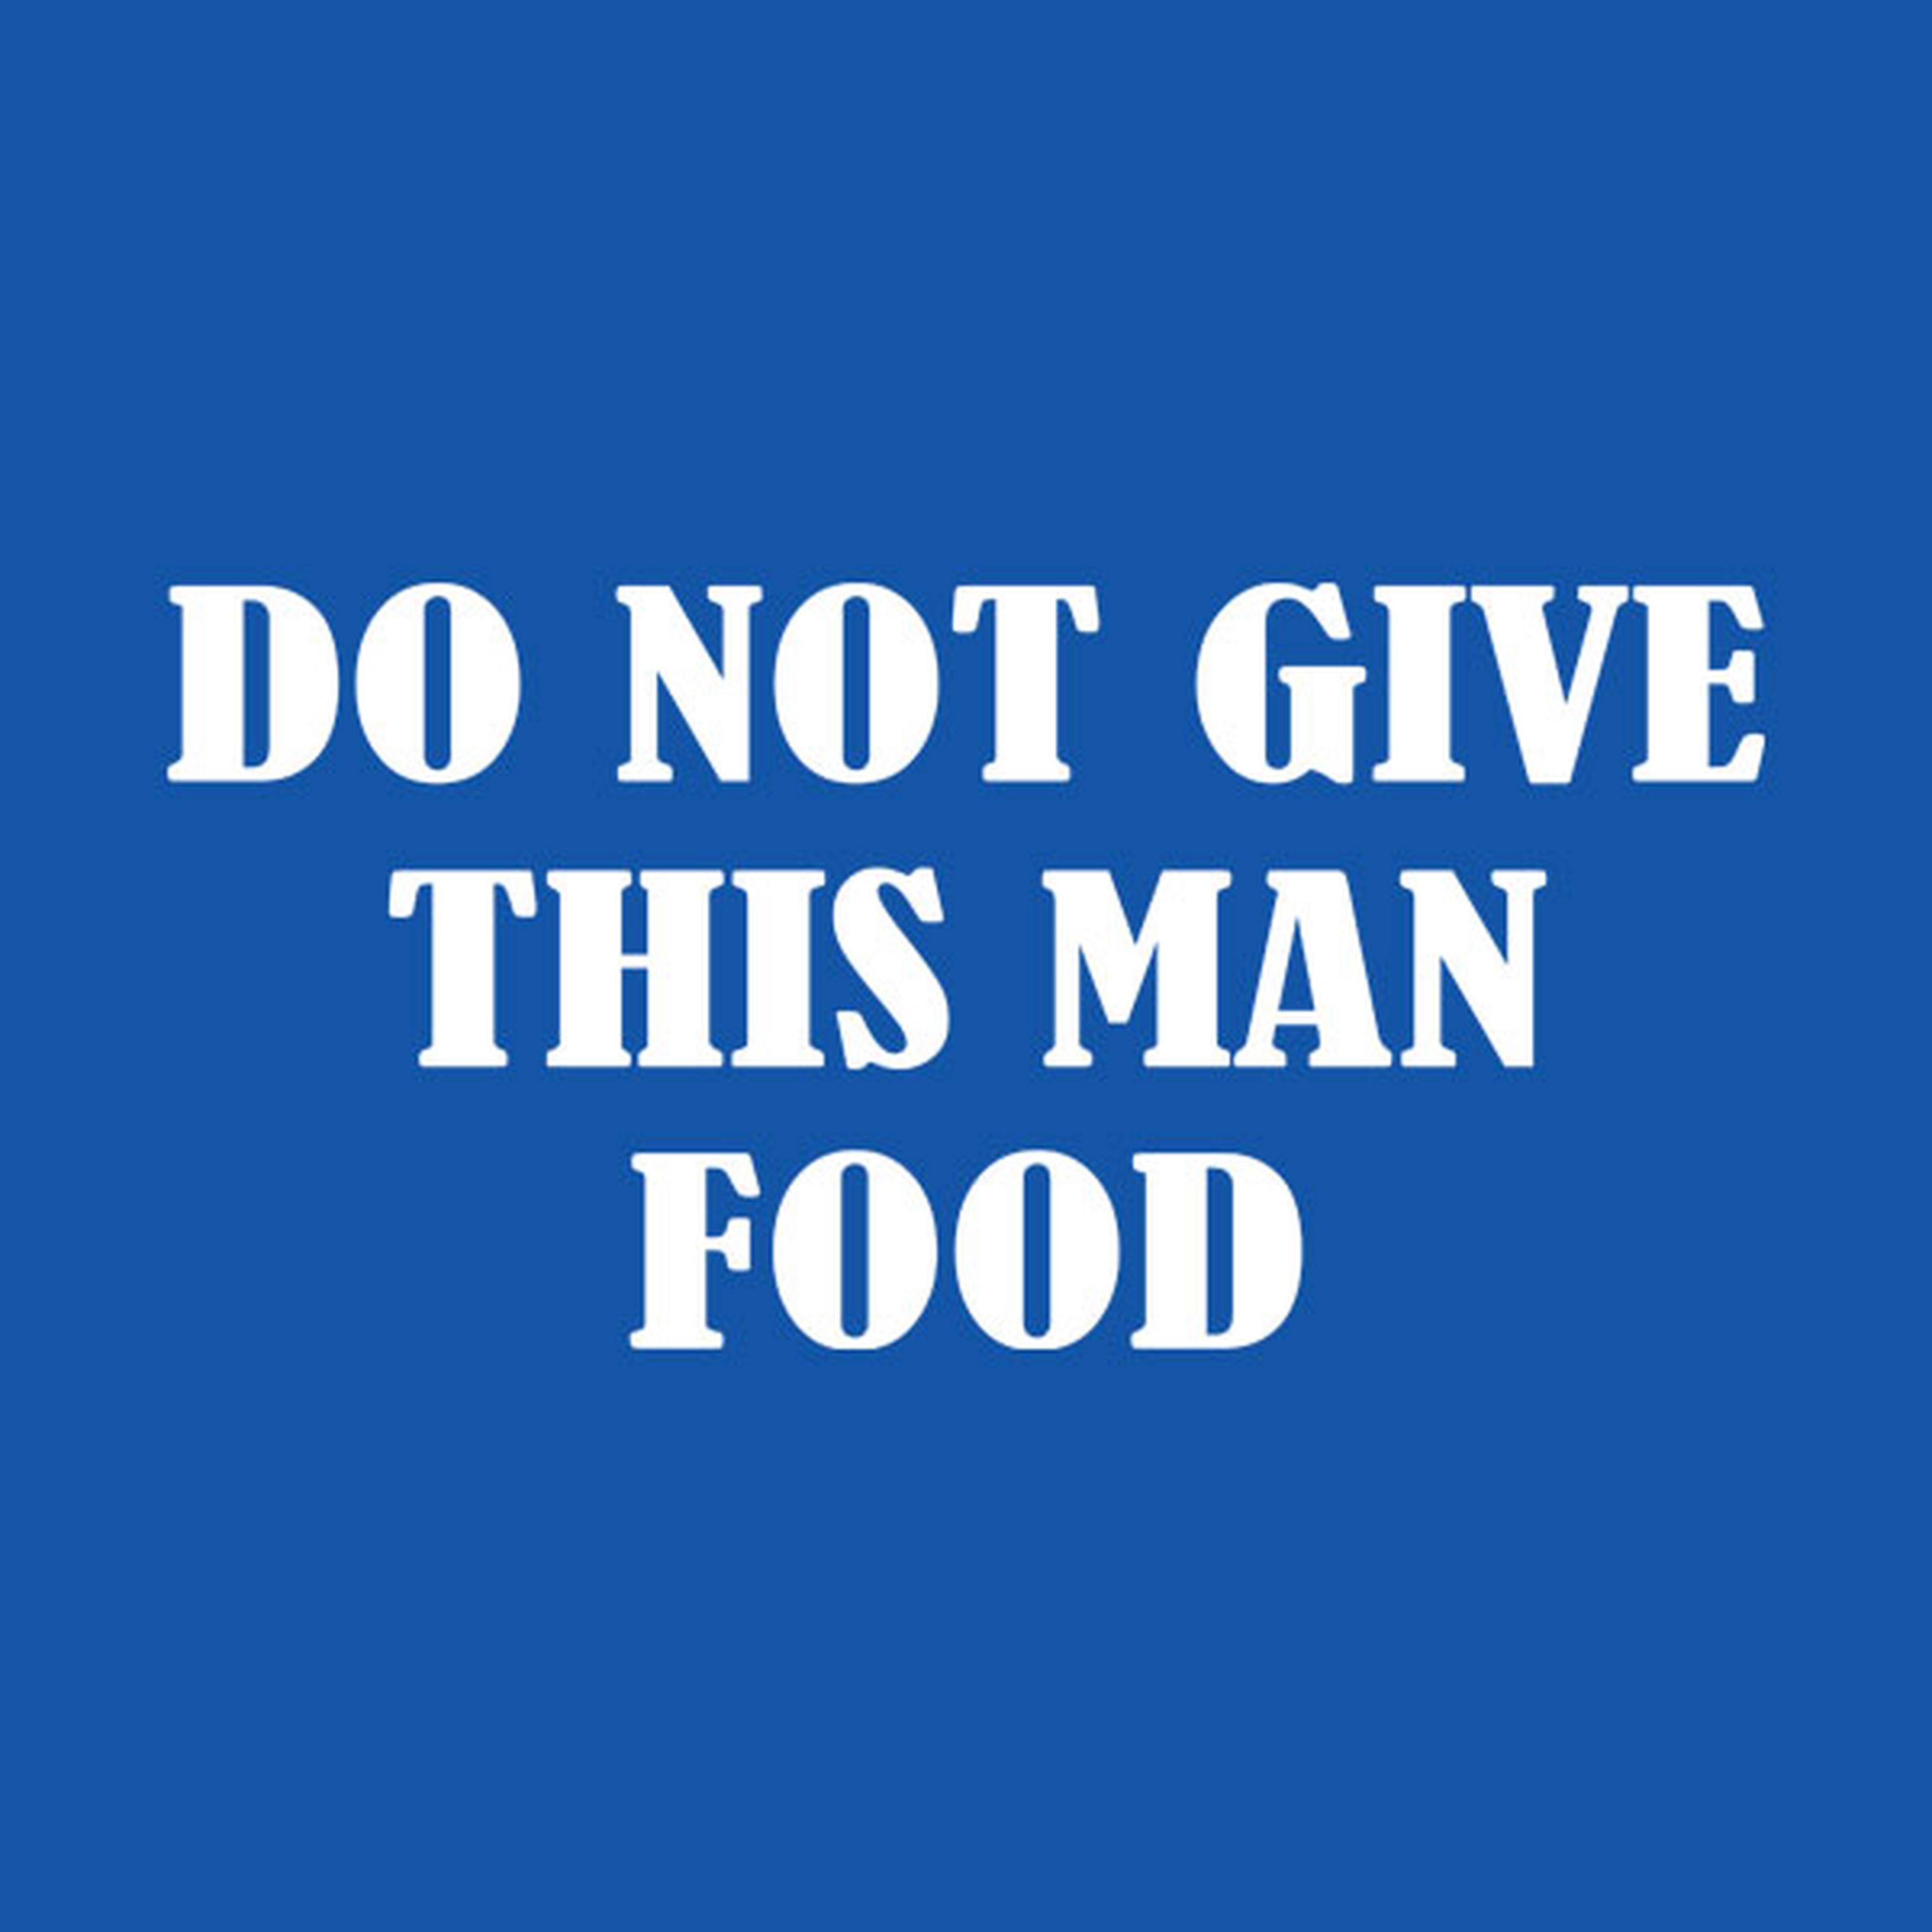 Do not give this man food - T-shirt